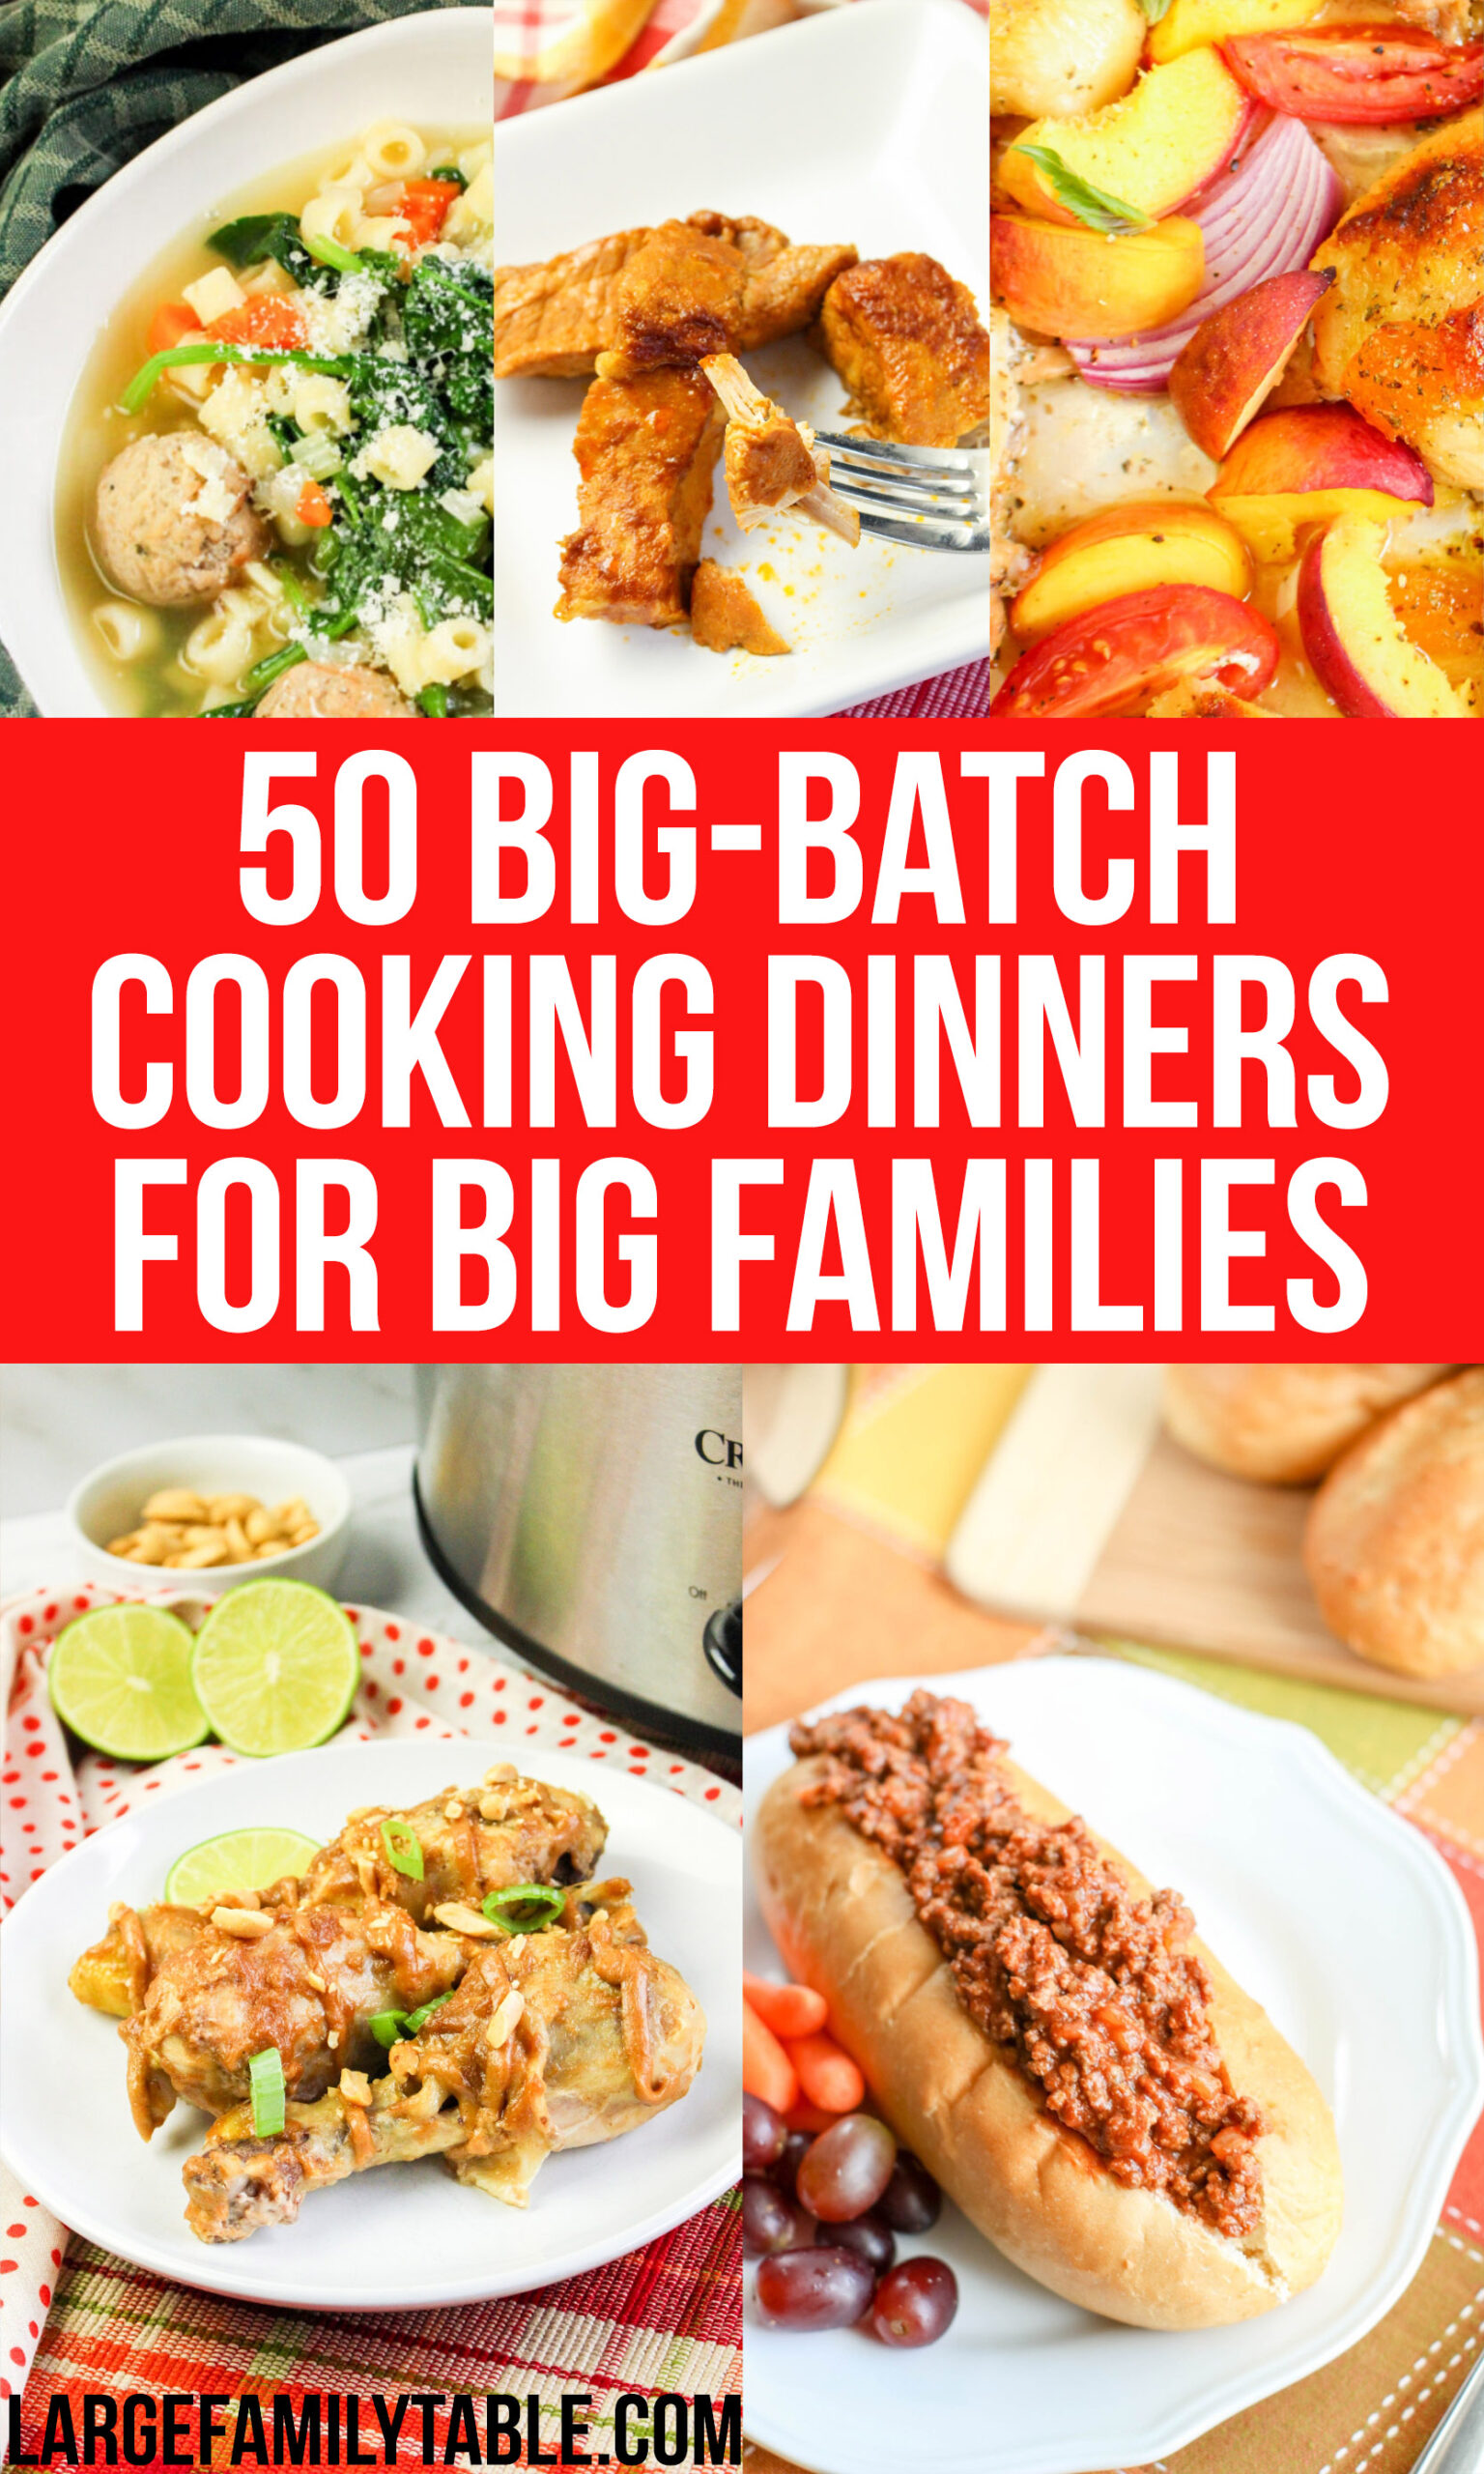 50 Big-Batch Cooking Dinner Ideas for Large Families - Large Family Table